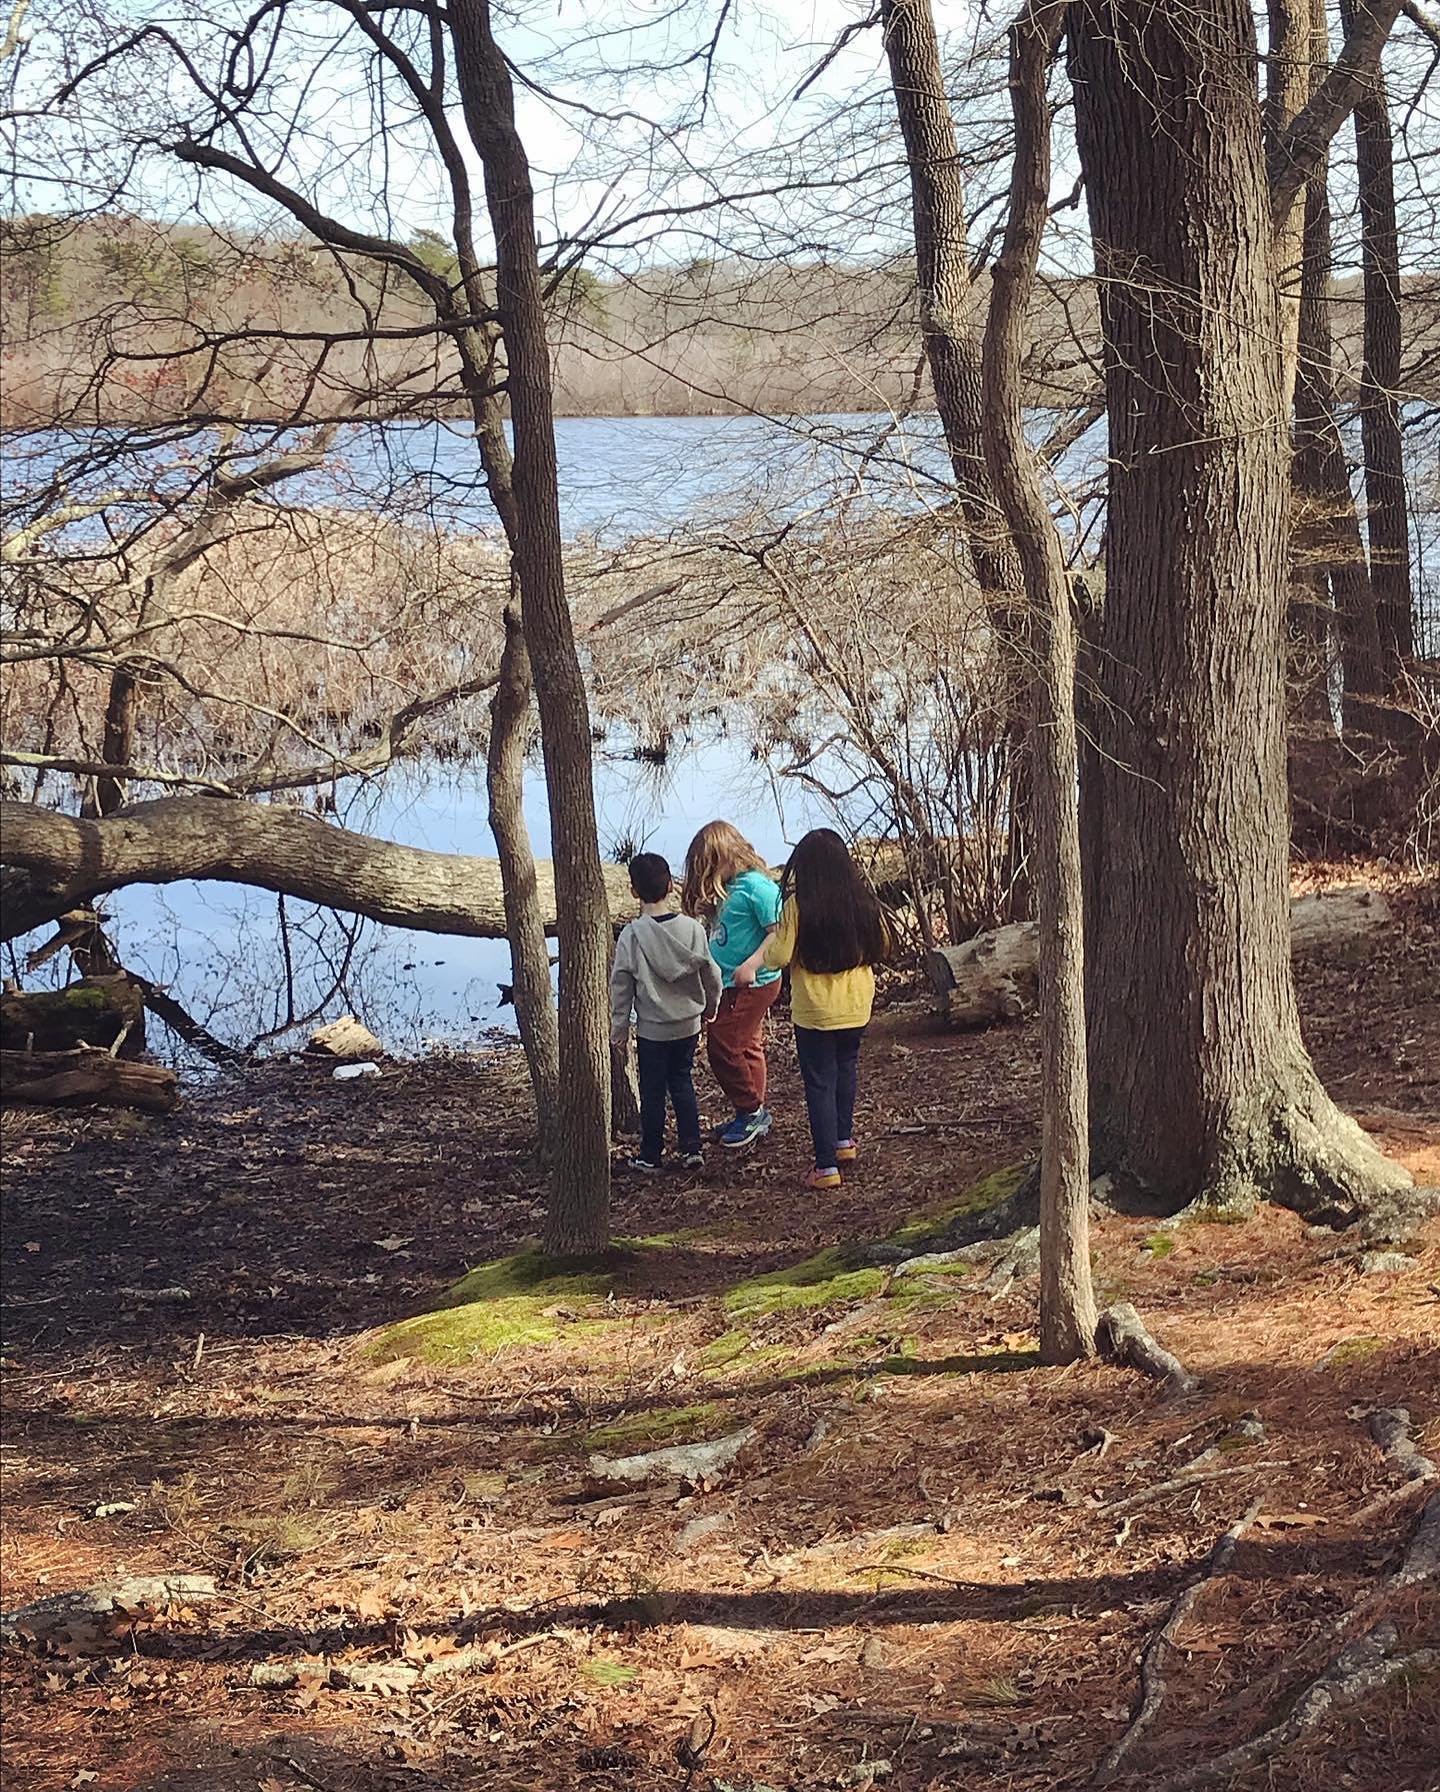 A beautiful day for a nature hike ✨ #nature #naturelover #funwithfriends #playallday #hike #naturewalk #spring #feelthesunshine #thisishomeschool